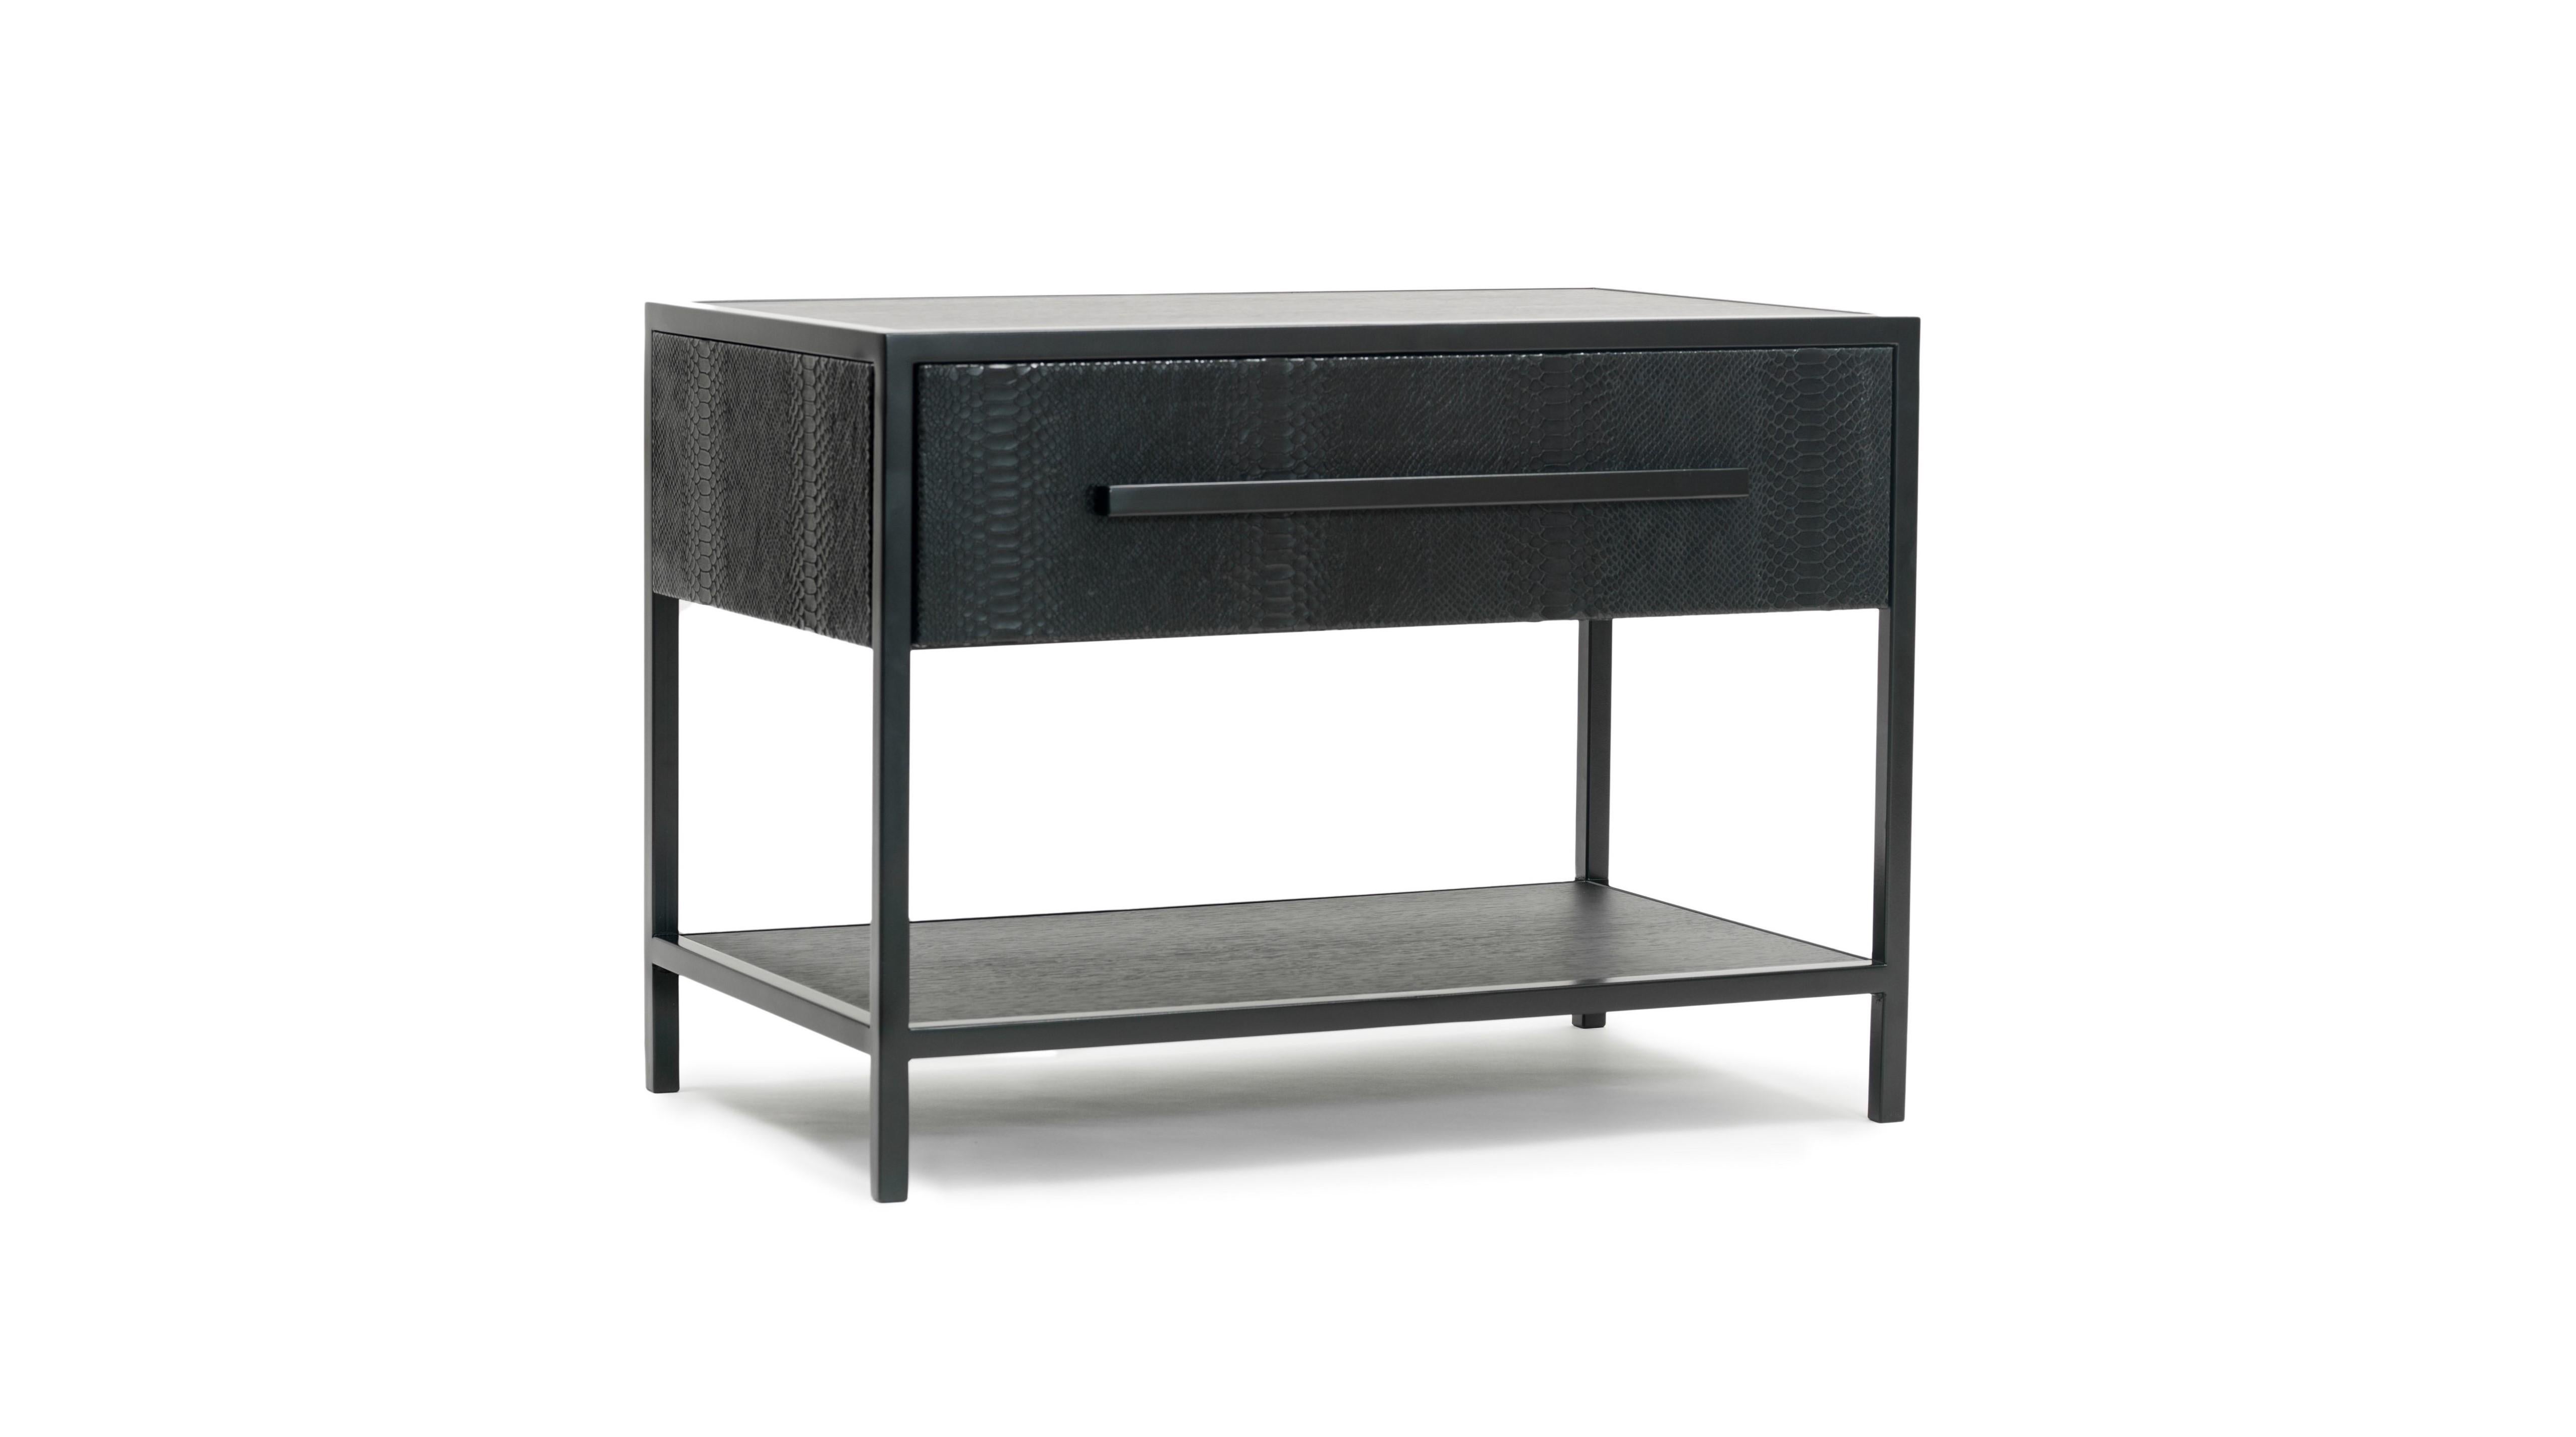 Combining function and design, the bed sidetable you shook me all night long pays homage to the different dimensions and textures of the color black. Its seemingly simple form allows the mix of materials to shine in a rich game of contrast.